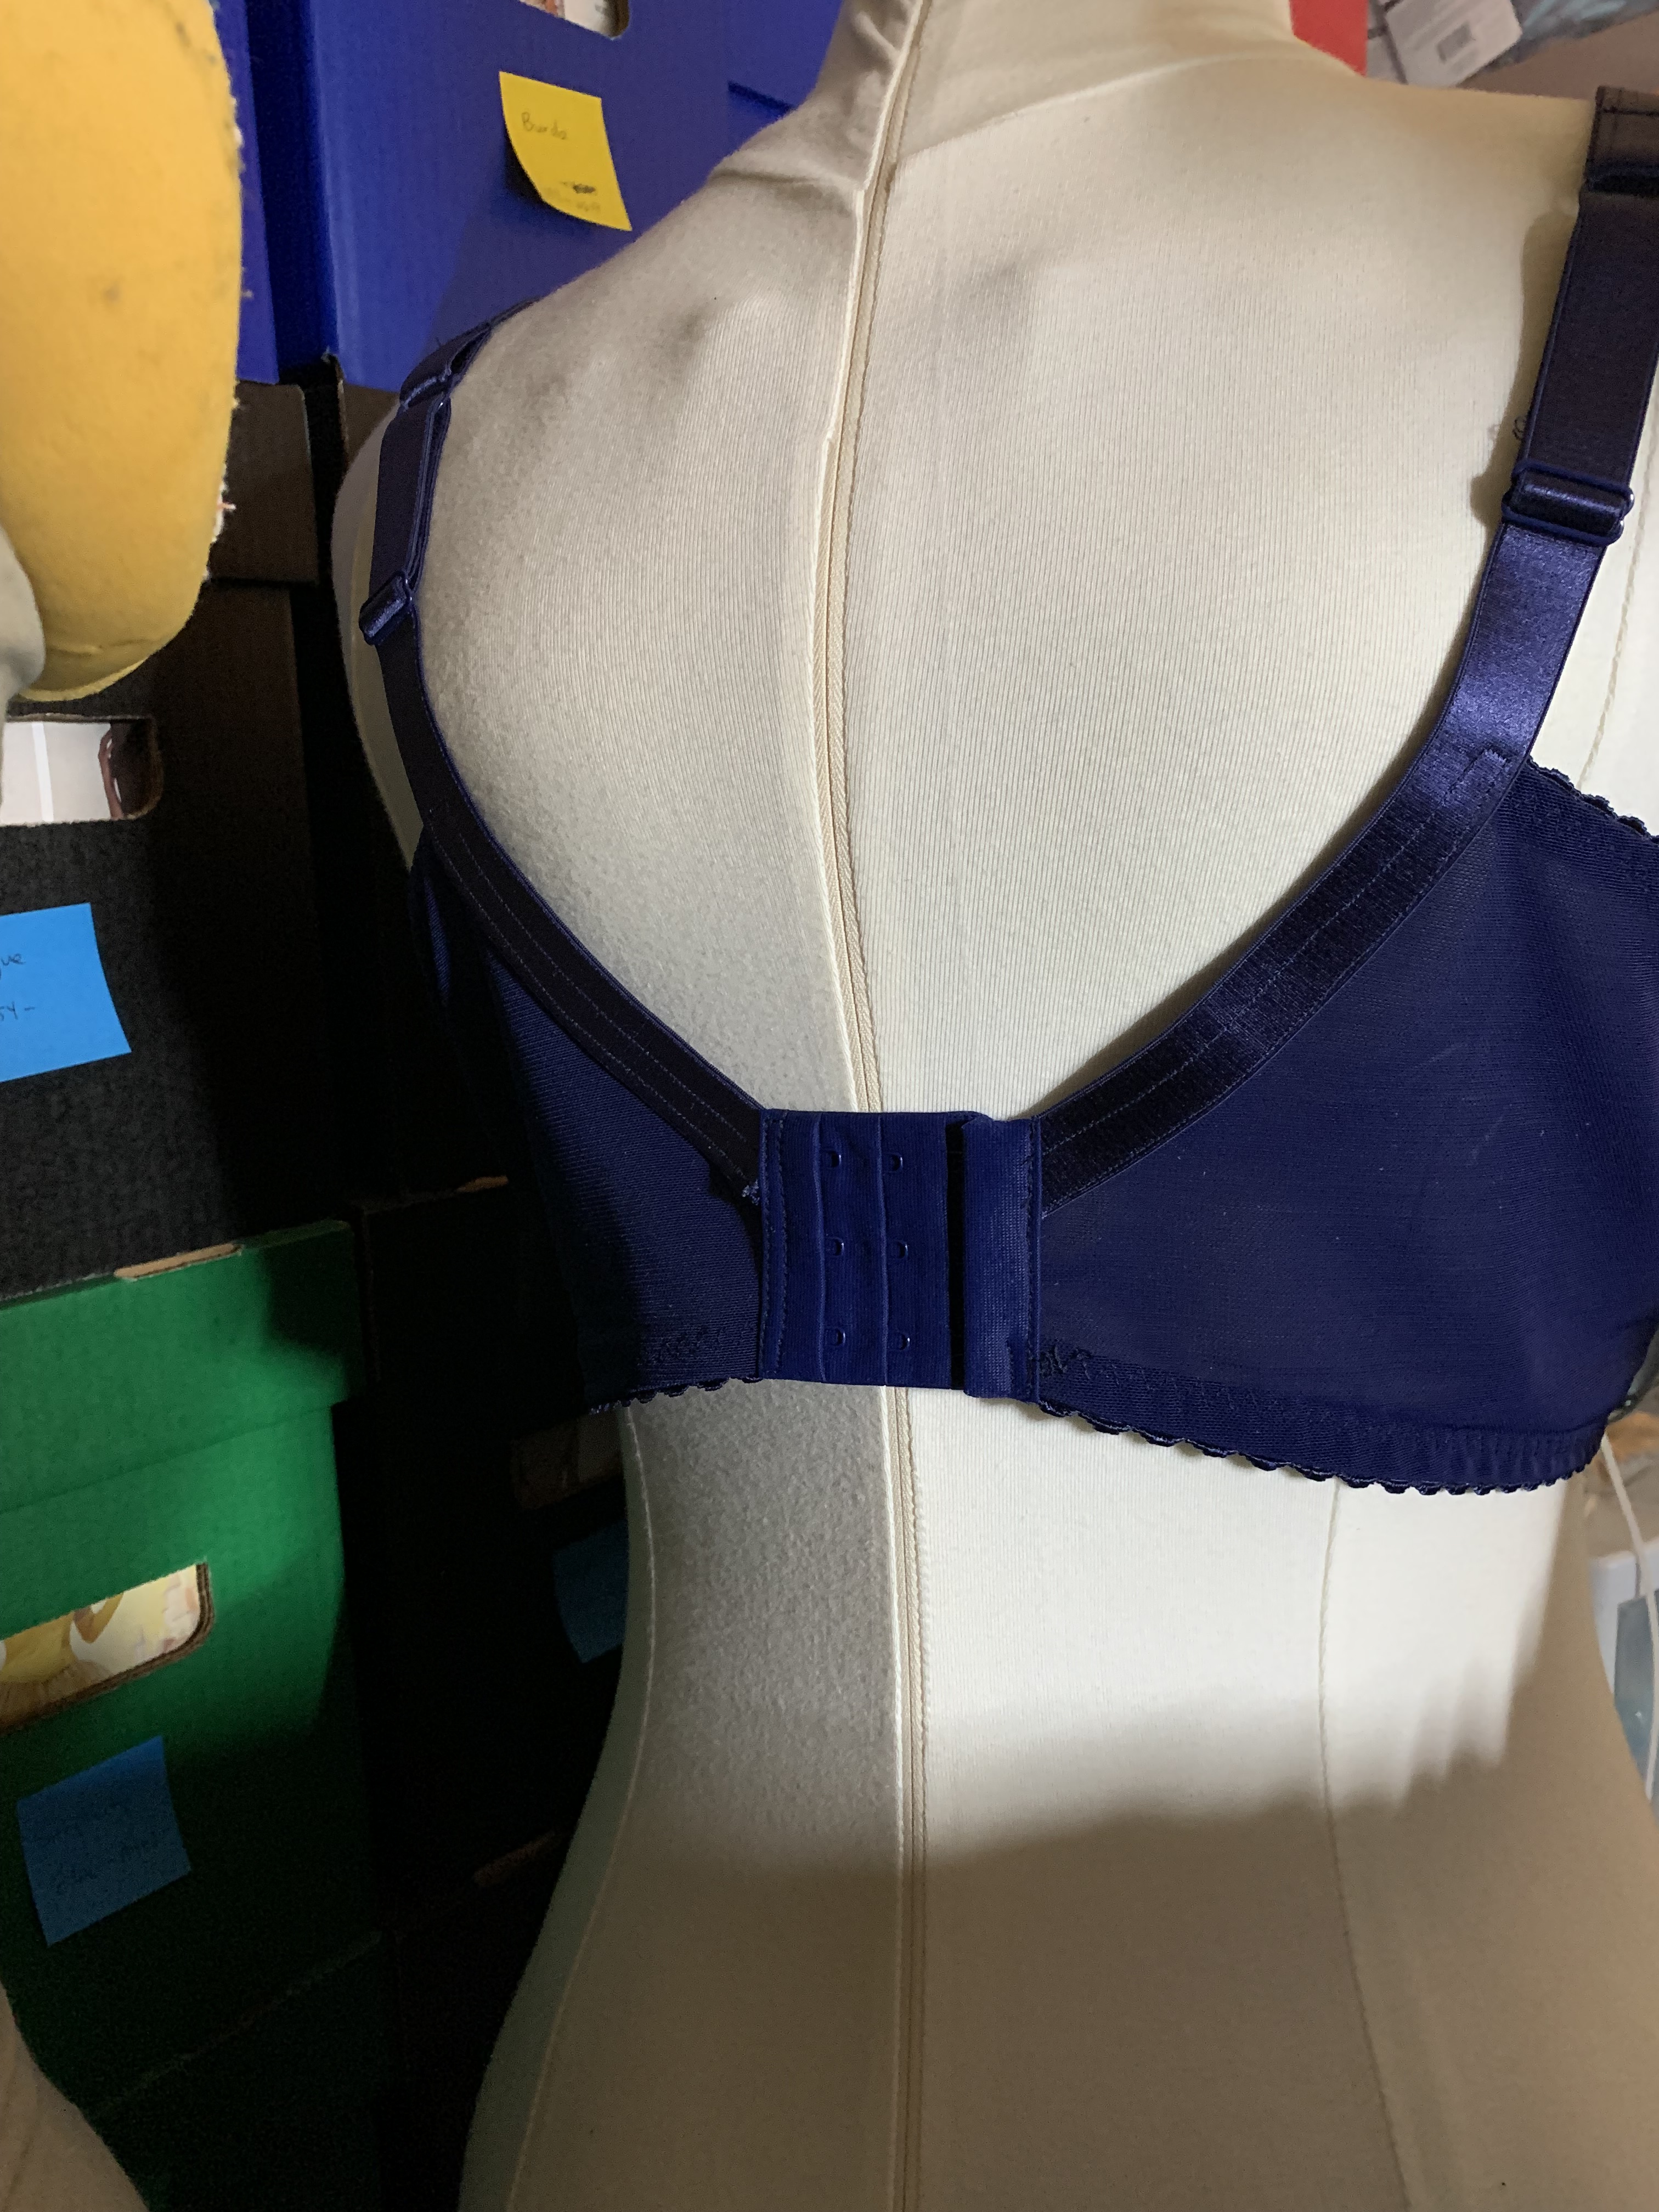 Sewing Bras and finding the fit - The Fabric Wrangler